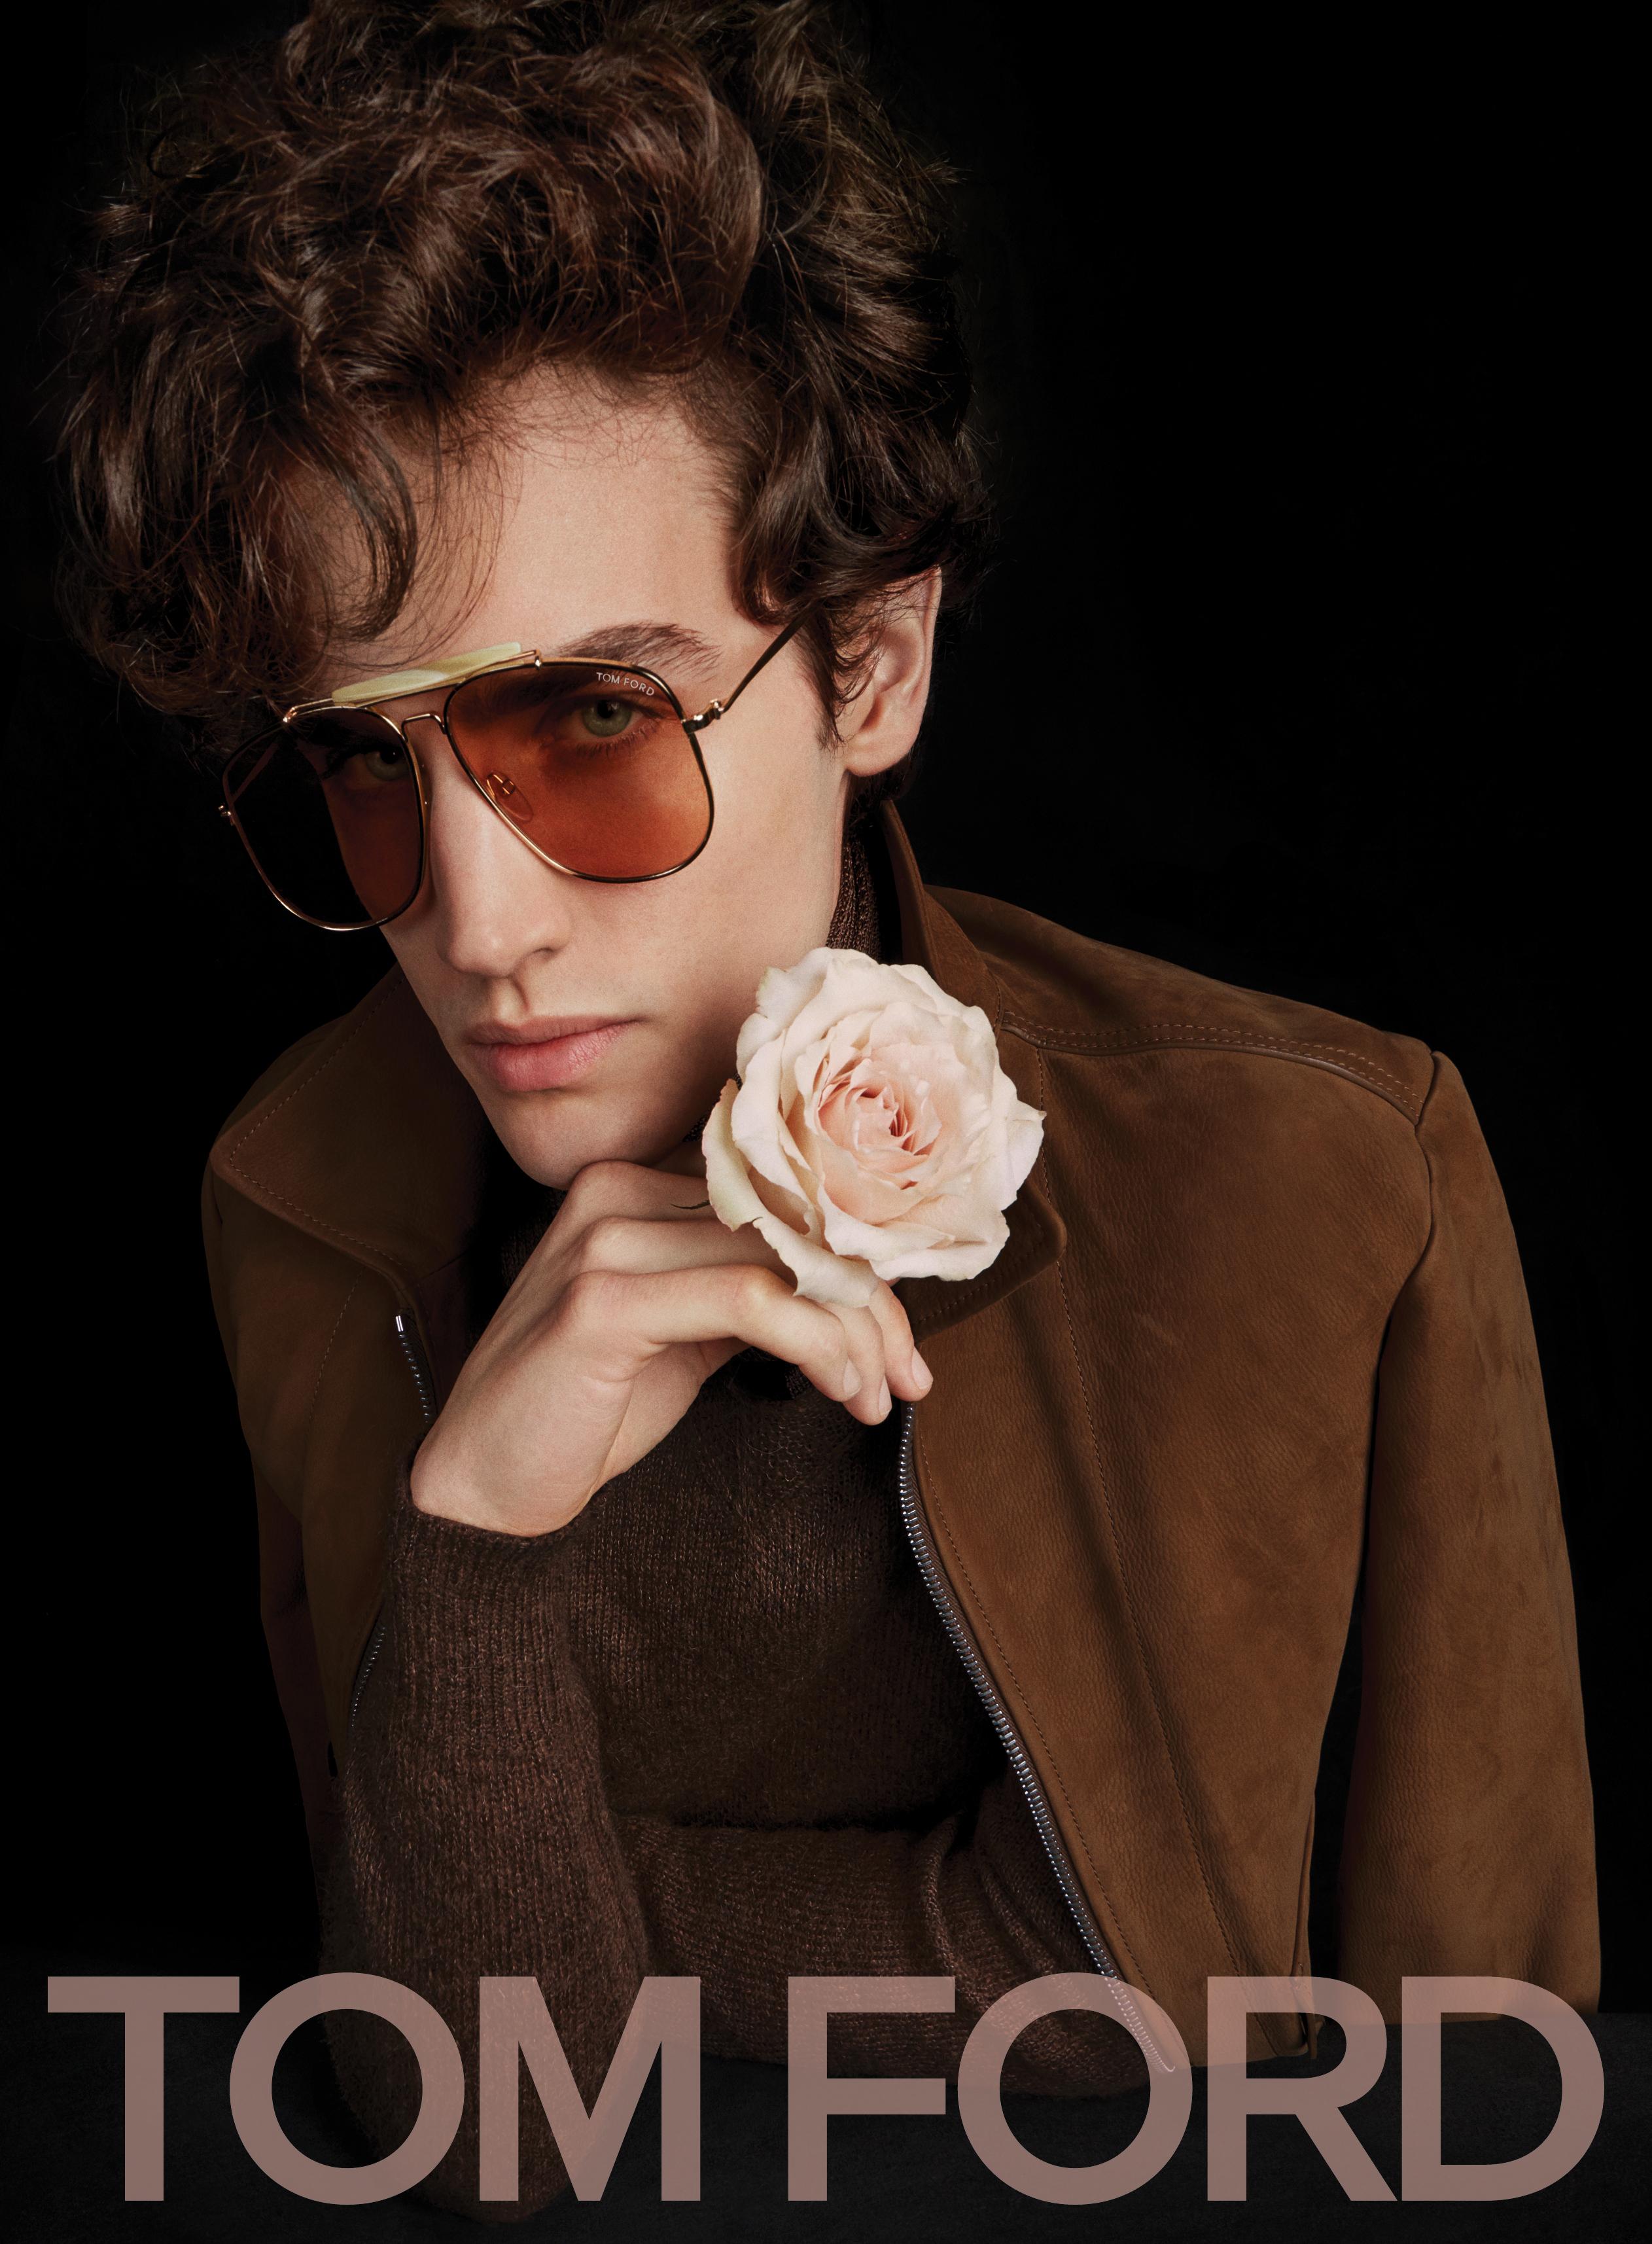 The Tom Ford Edit - Escentual's Blog